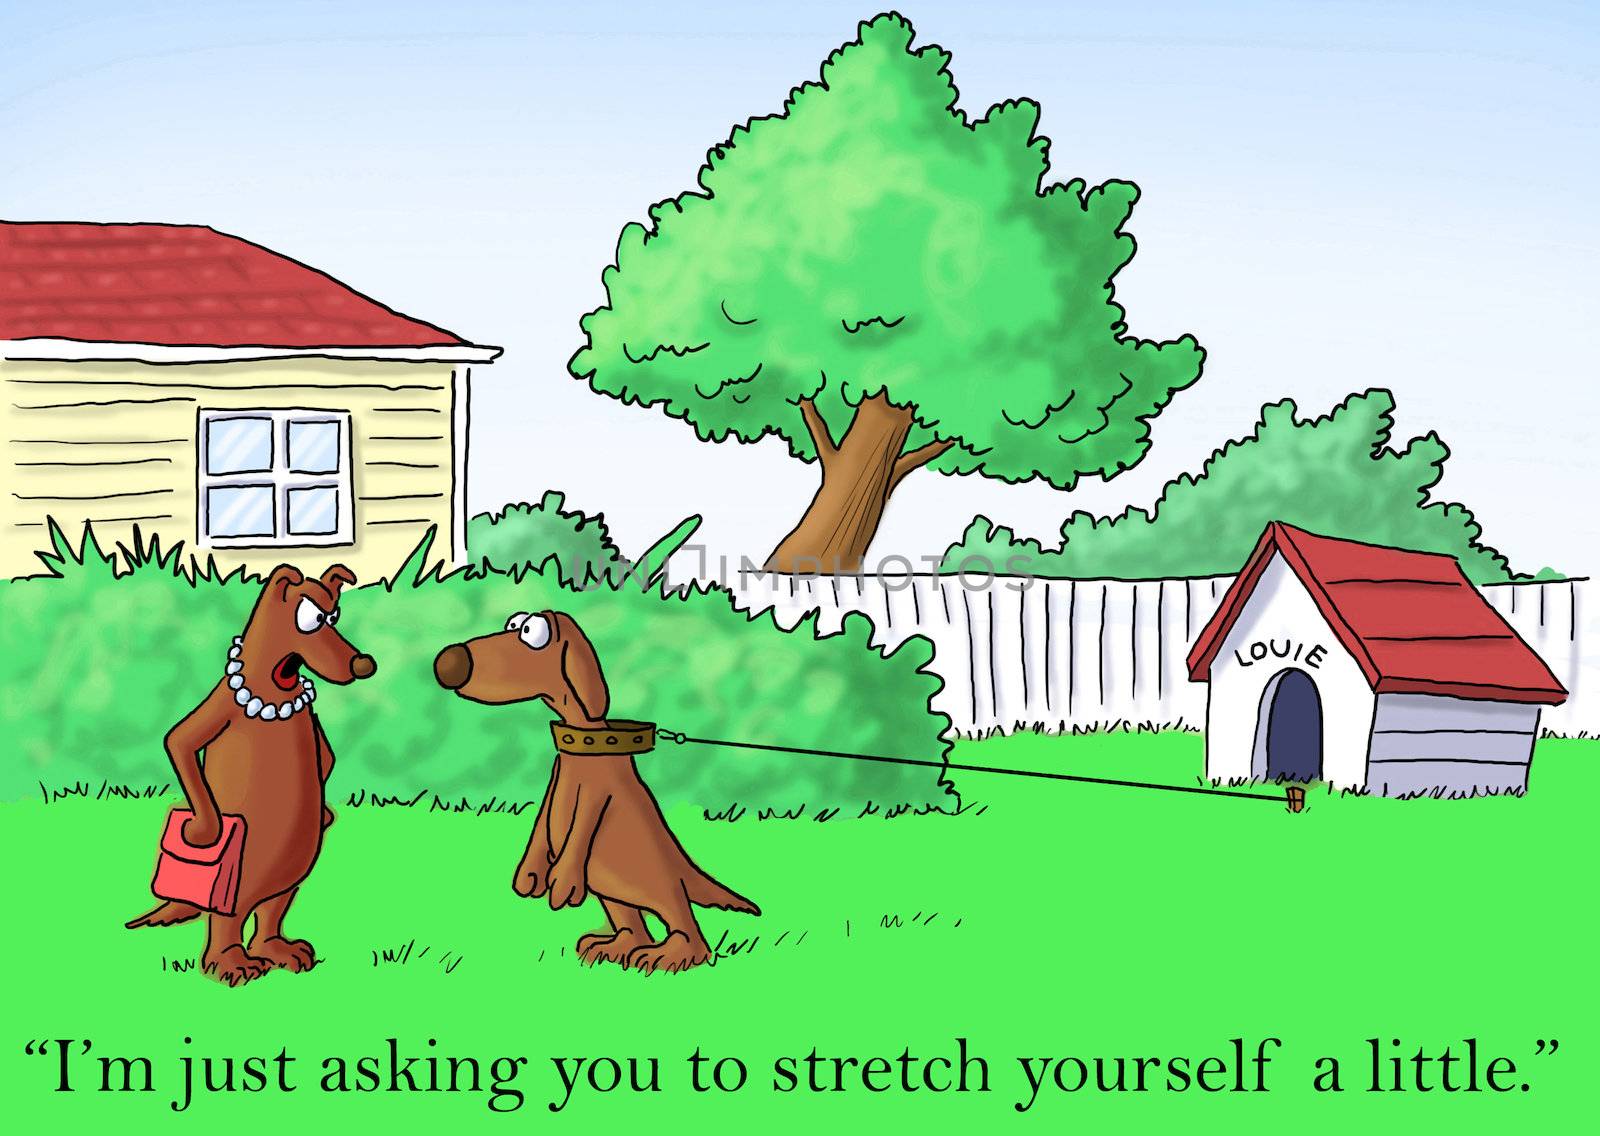 "I'm just asking you to stretch yourself a little."